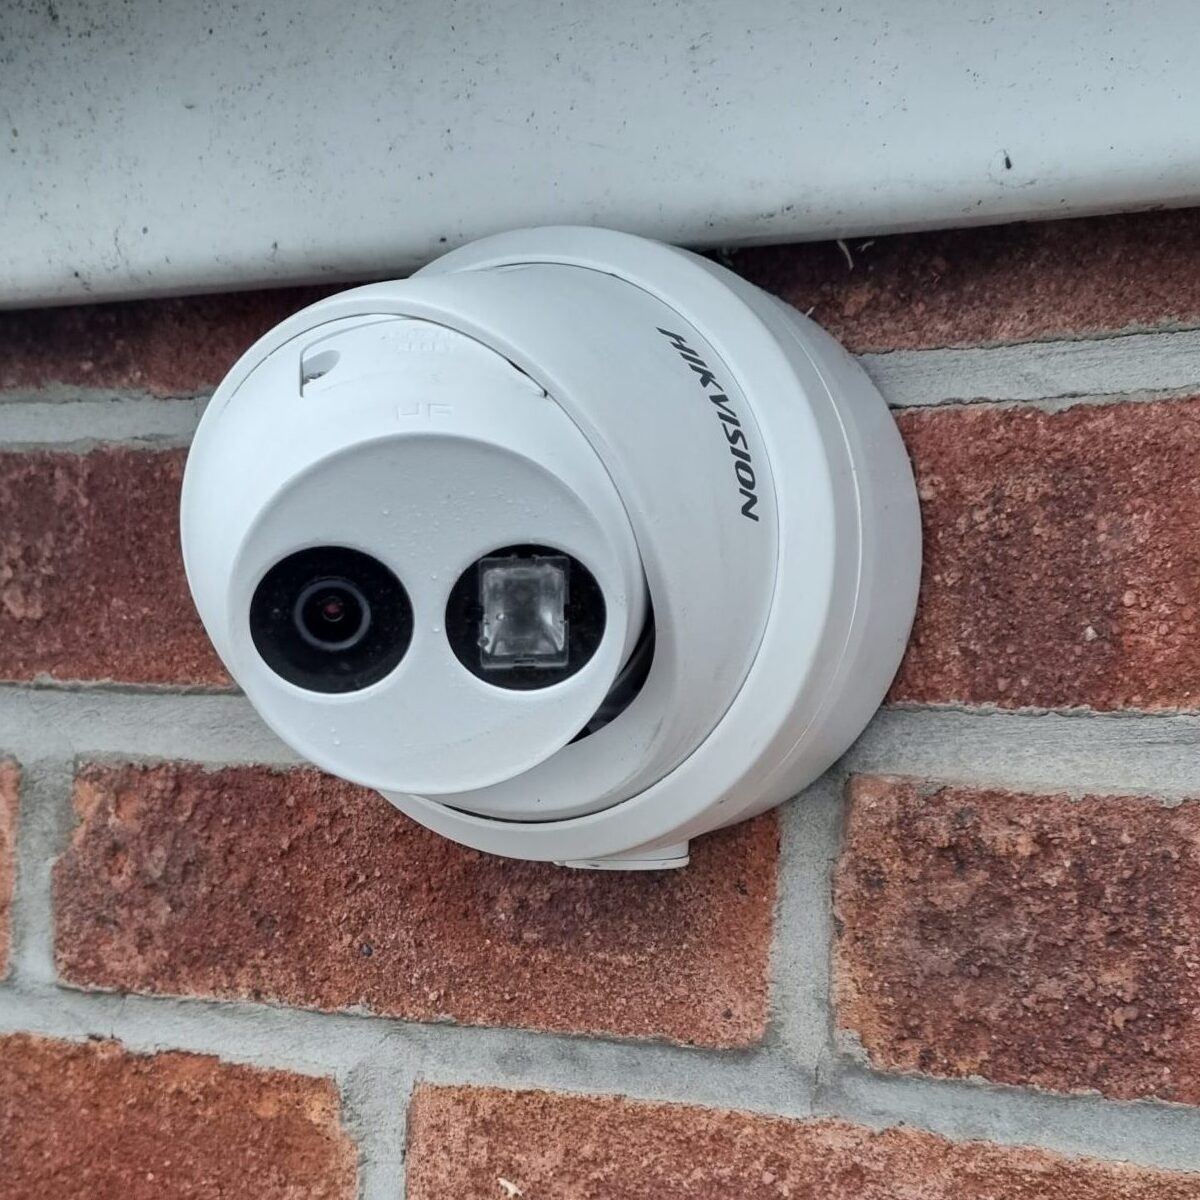 A whit CCTV camera fixed to a brick wall